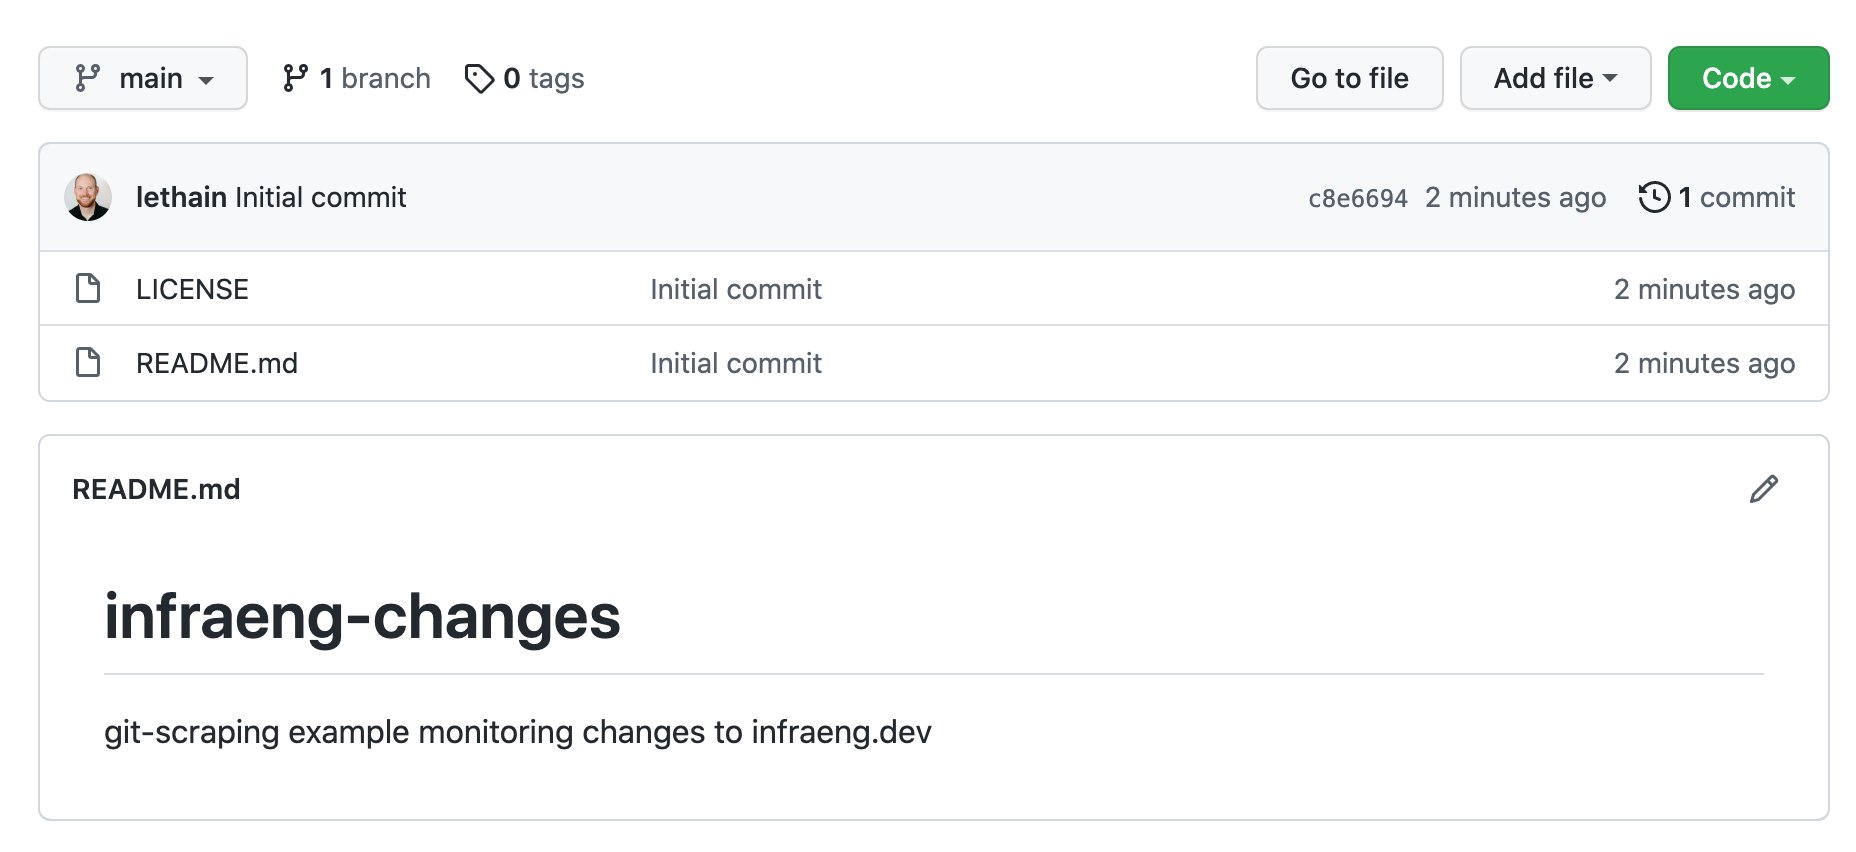 Creating a new github repo named infraeng-changes